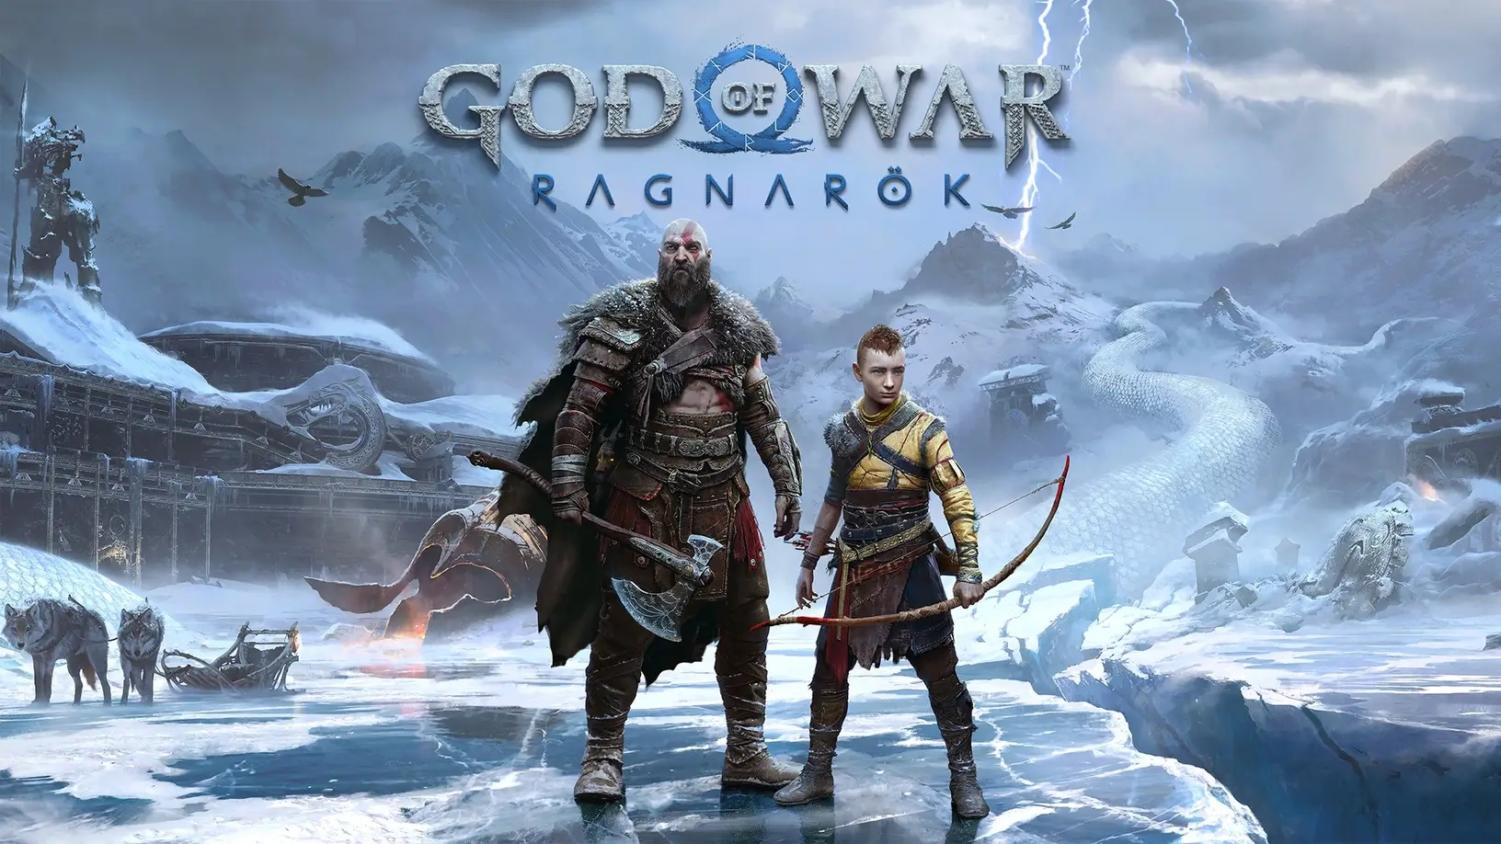 God of War Ragnarök's designers want you to express yourself (with  violence) - The Verge